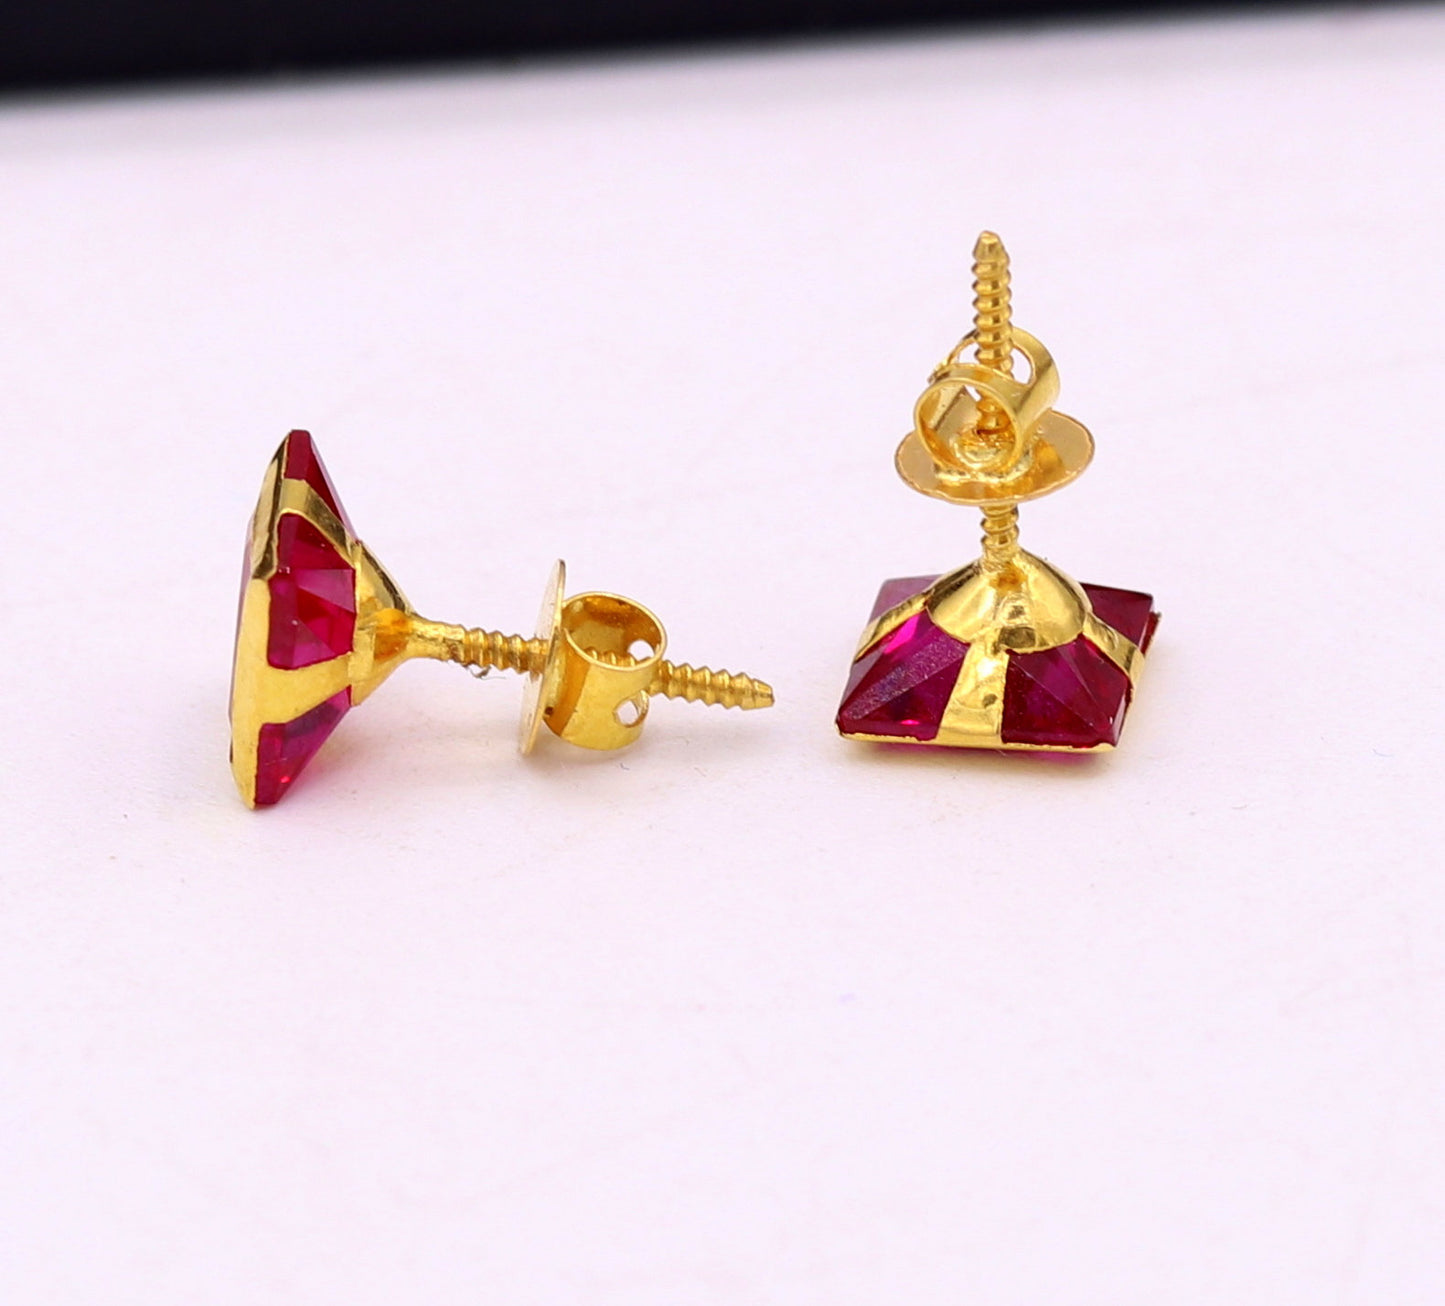 18kt yellow gold handmade fabulous ruby color stone stud earring unisex gifting jewelry - TRIBAL ORNAMENTS